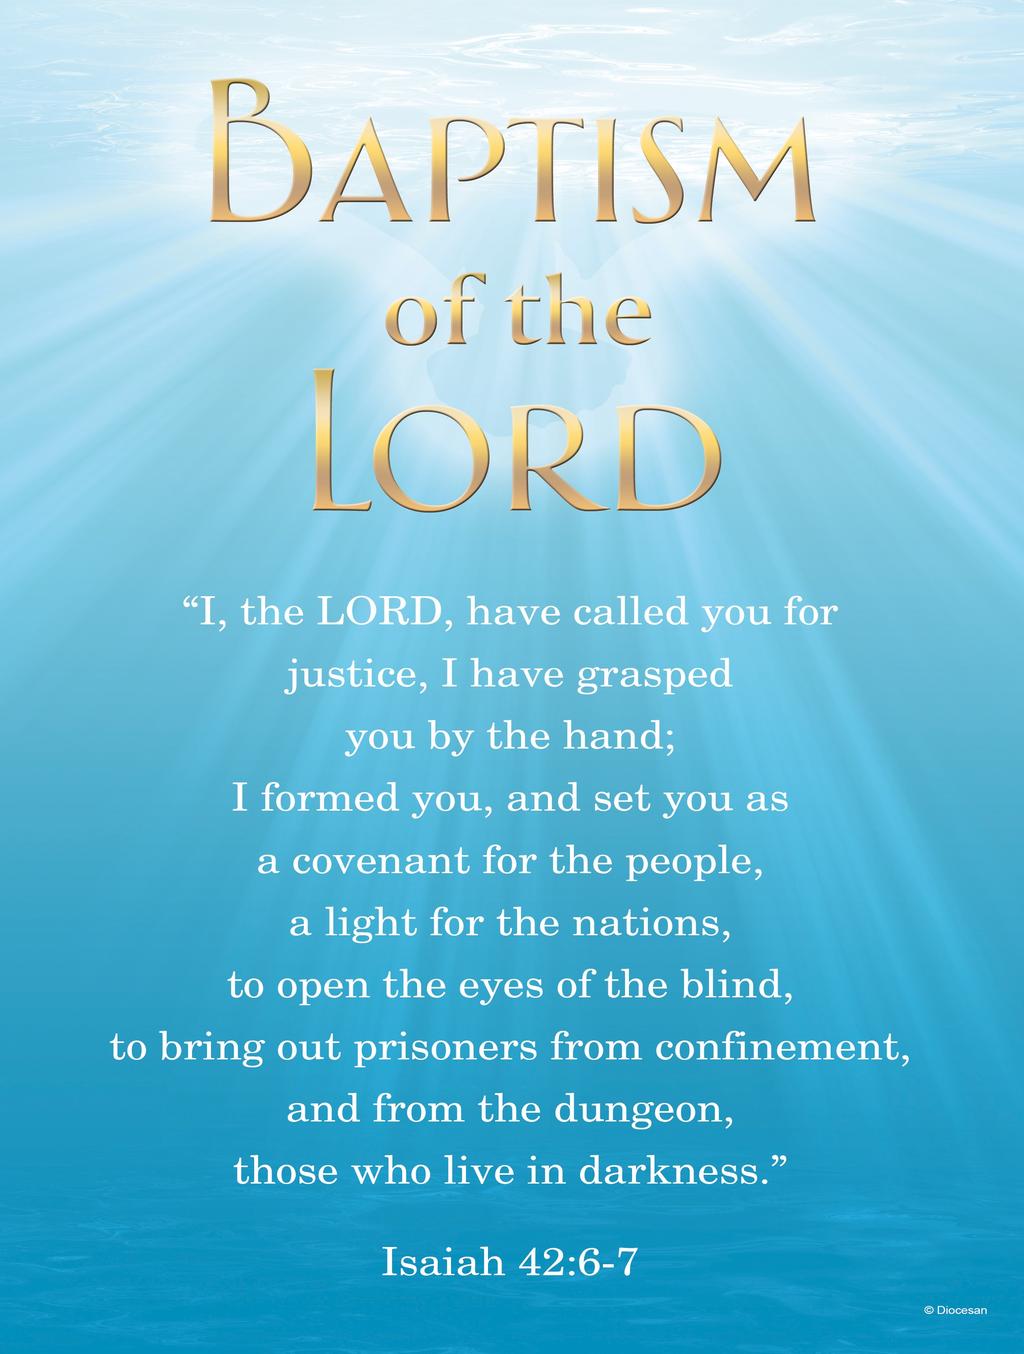 org Early Childhood Learning Center: 330-782-4060 School Lobby: 330-788-0025 THE BAPTISM OF THE LORD JANUARY